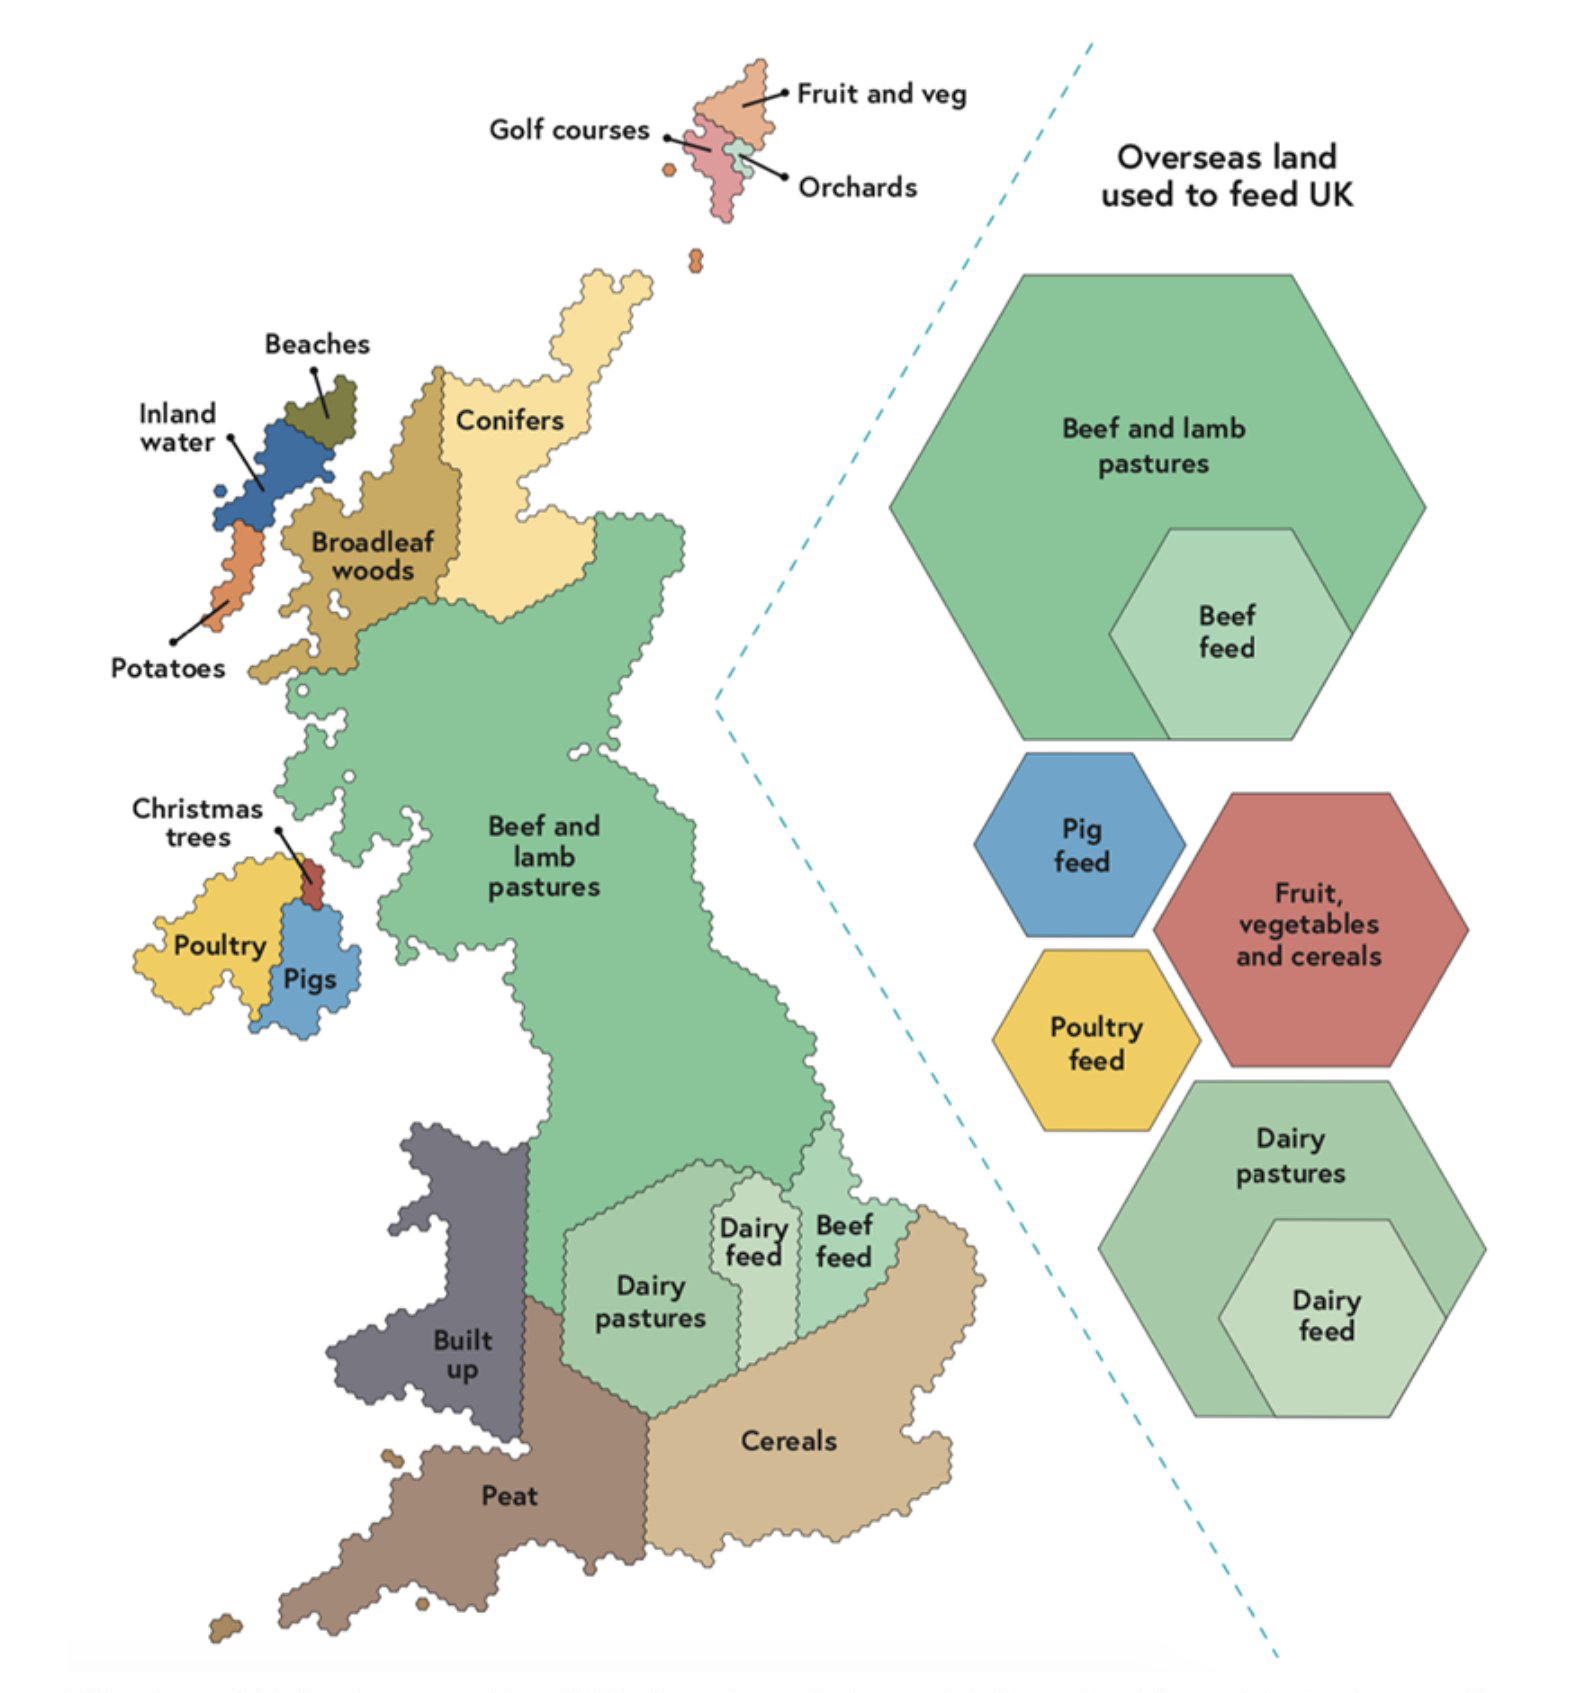 A map of the UK which groups different types of land use together to show their relative scale. Beef and lamb pastures cover a huge portion of land from northern Scotland down past the midlands. Built-up areas cover about half of west Wales. Cereals cover the south-east.